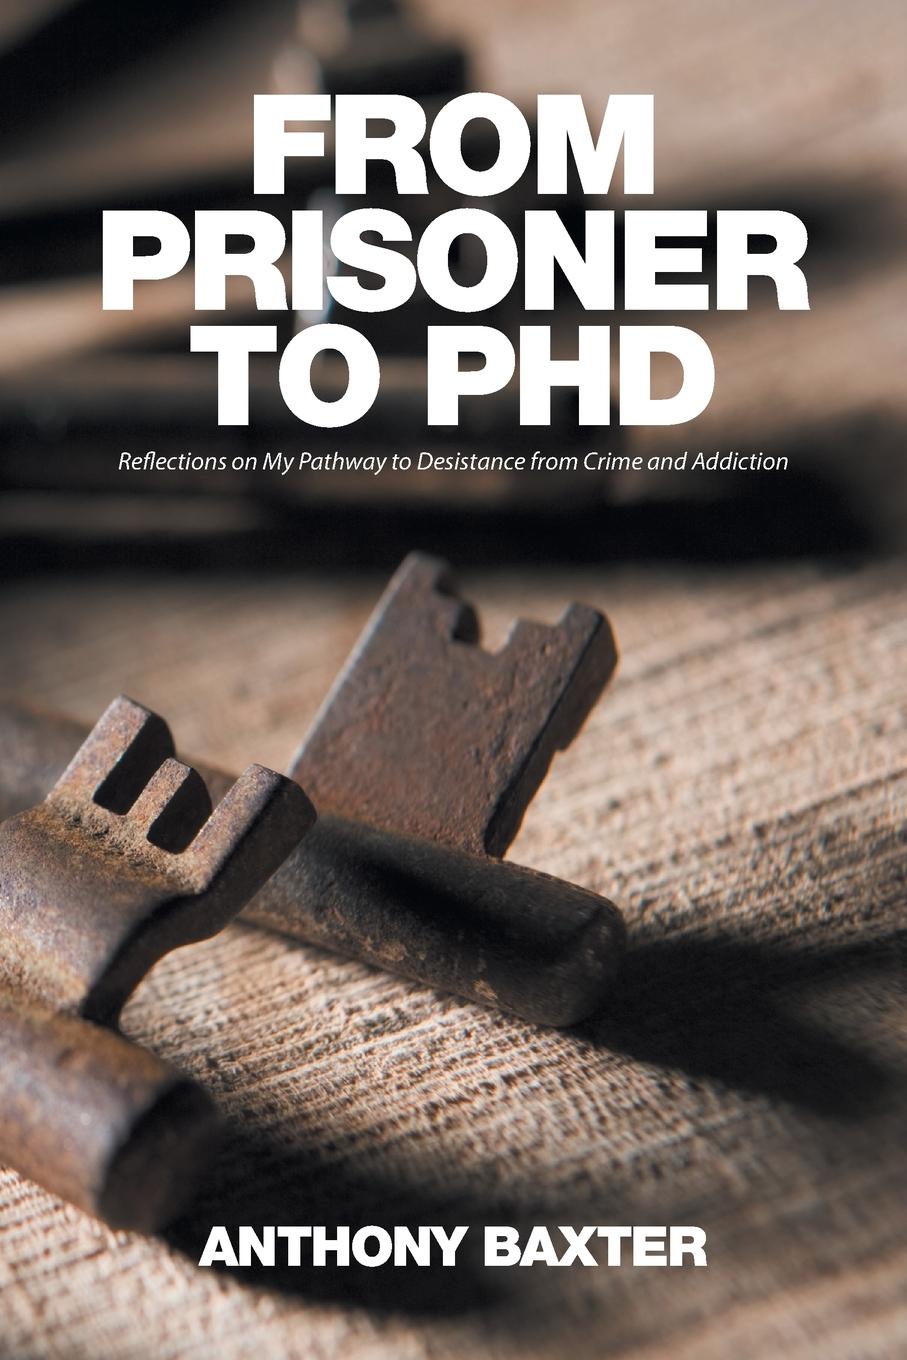 From Prisoner to PhD. Reflections on My Pathway to Desistance from Crime and Addiction